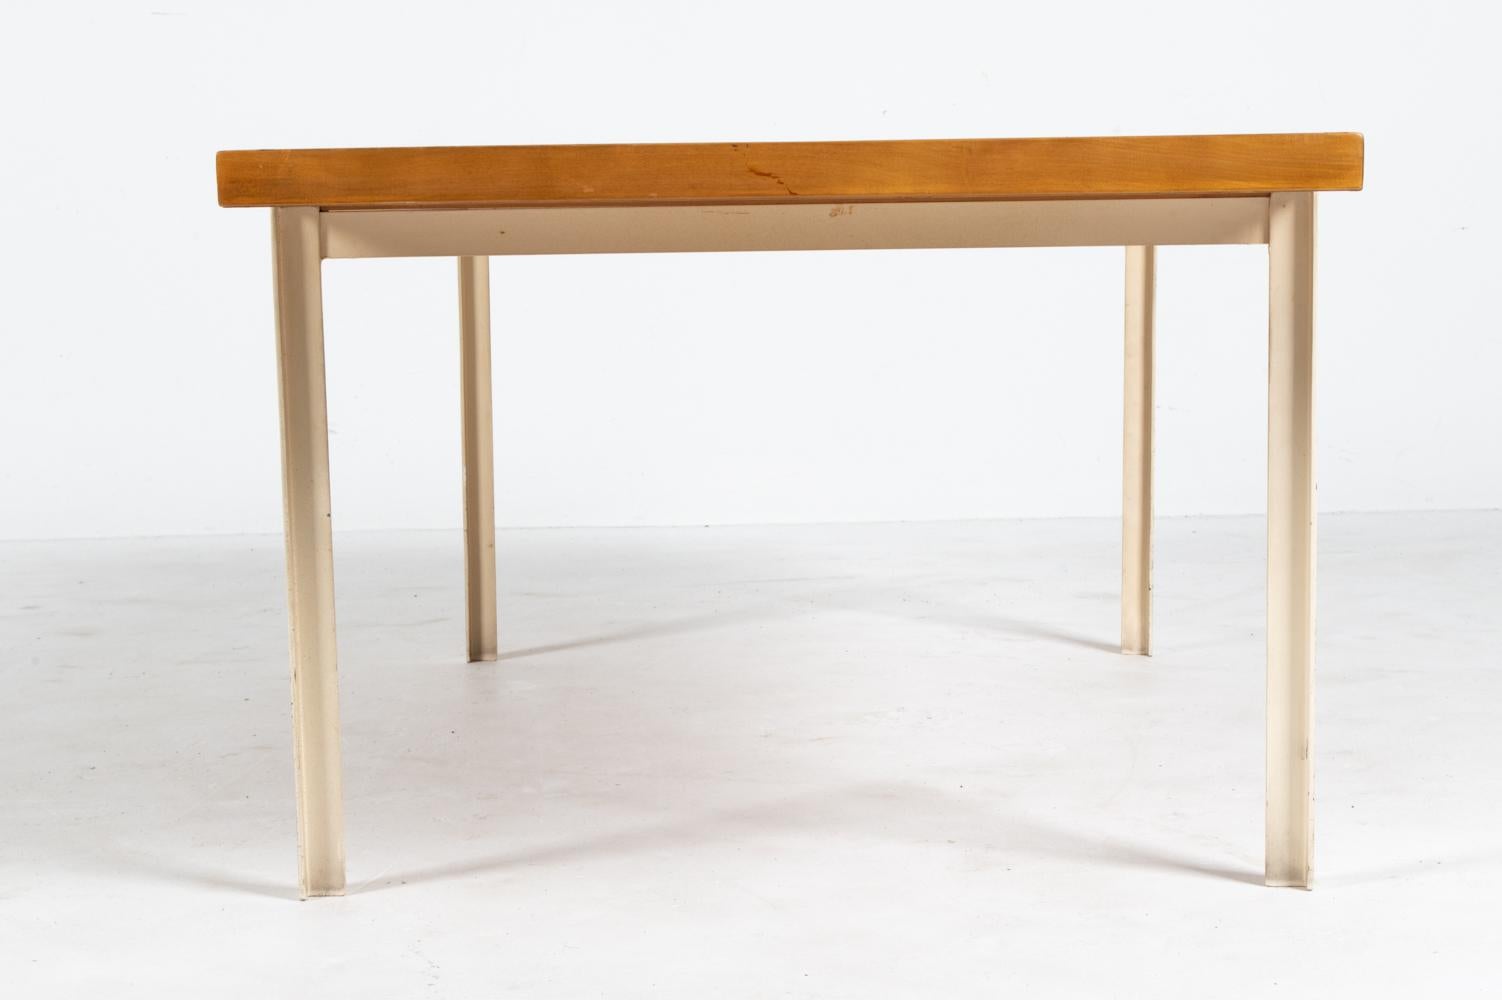 Metal Rare Florence Knoll T-Angle Coffee Table in Birch; Knoll International c. 1960's